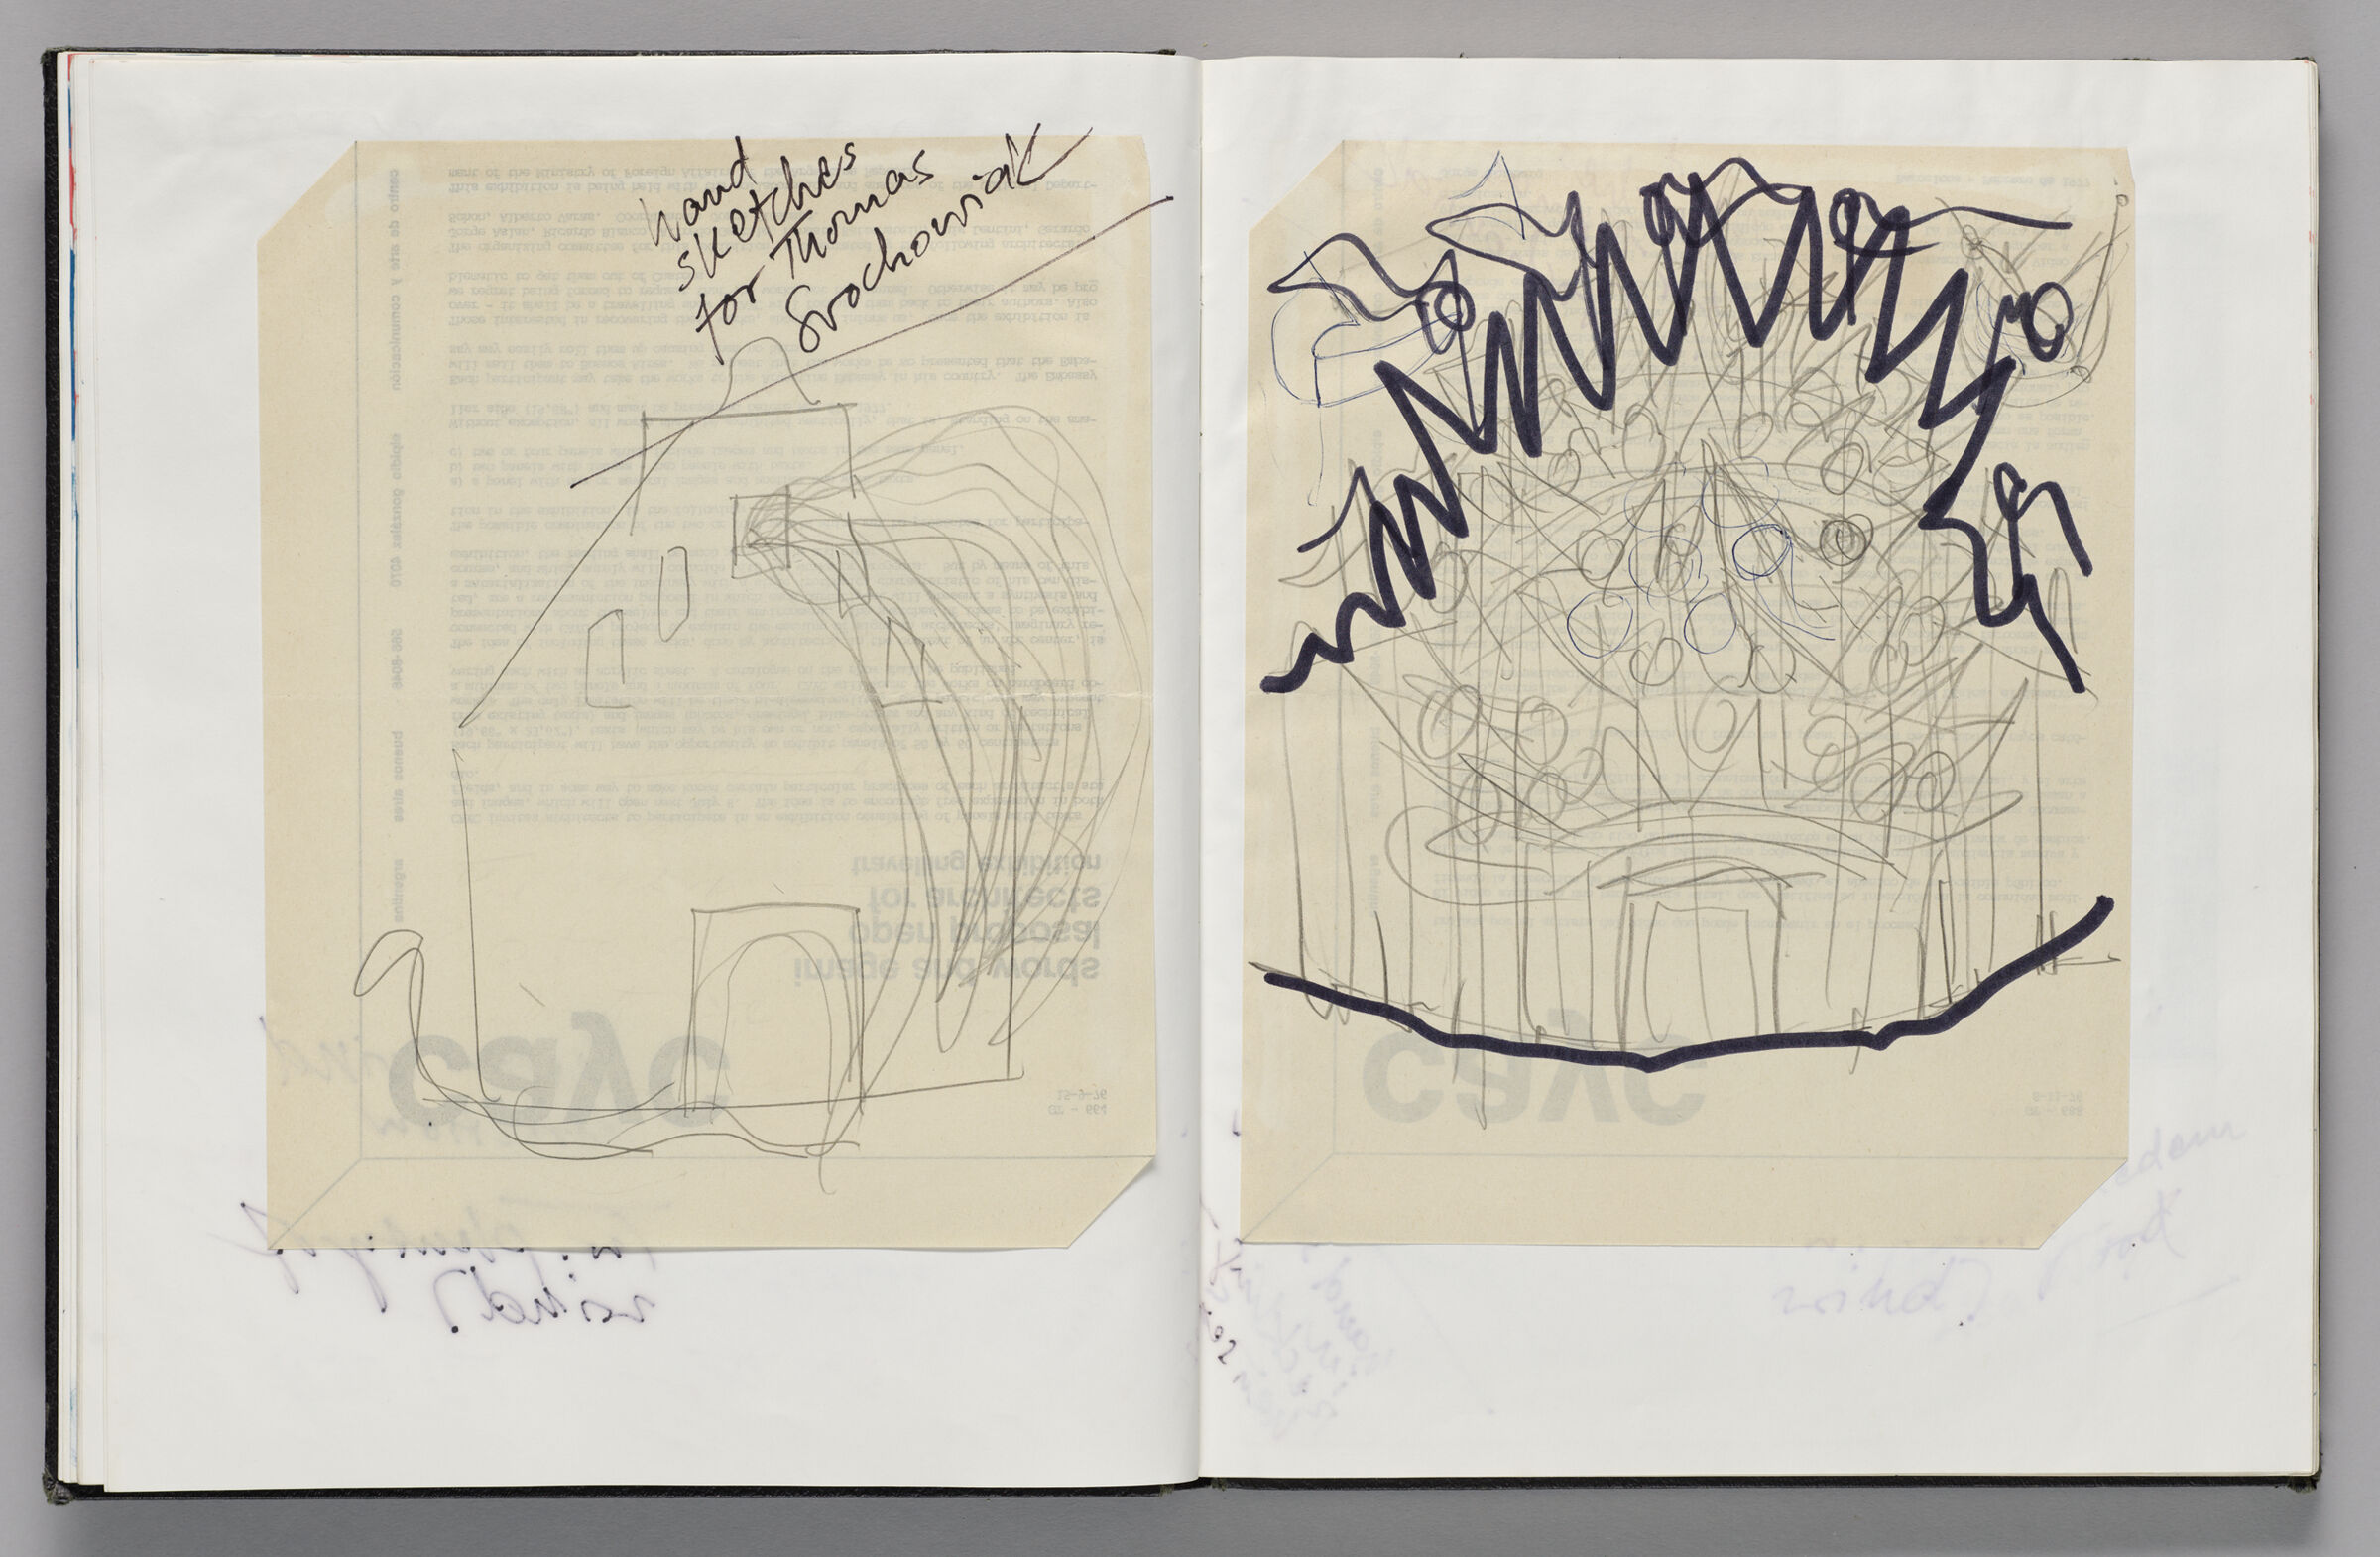 Untitled (Pasted Sketch For Europalia Inflatable, Left Page); Untitled (Pasted Sketch For Europalia Inflatable, Right Page)